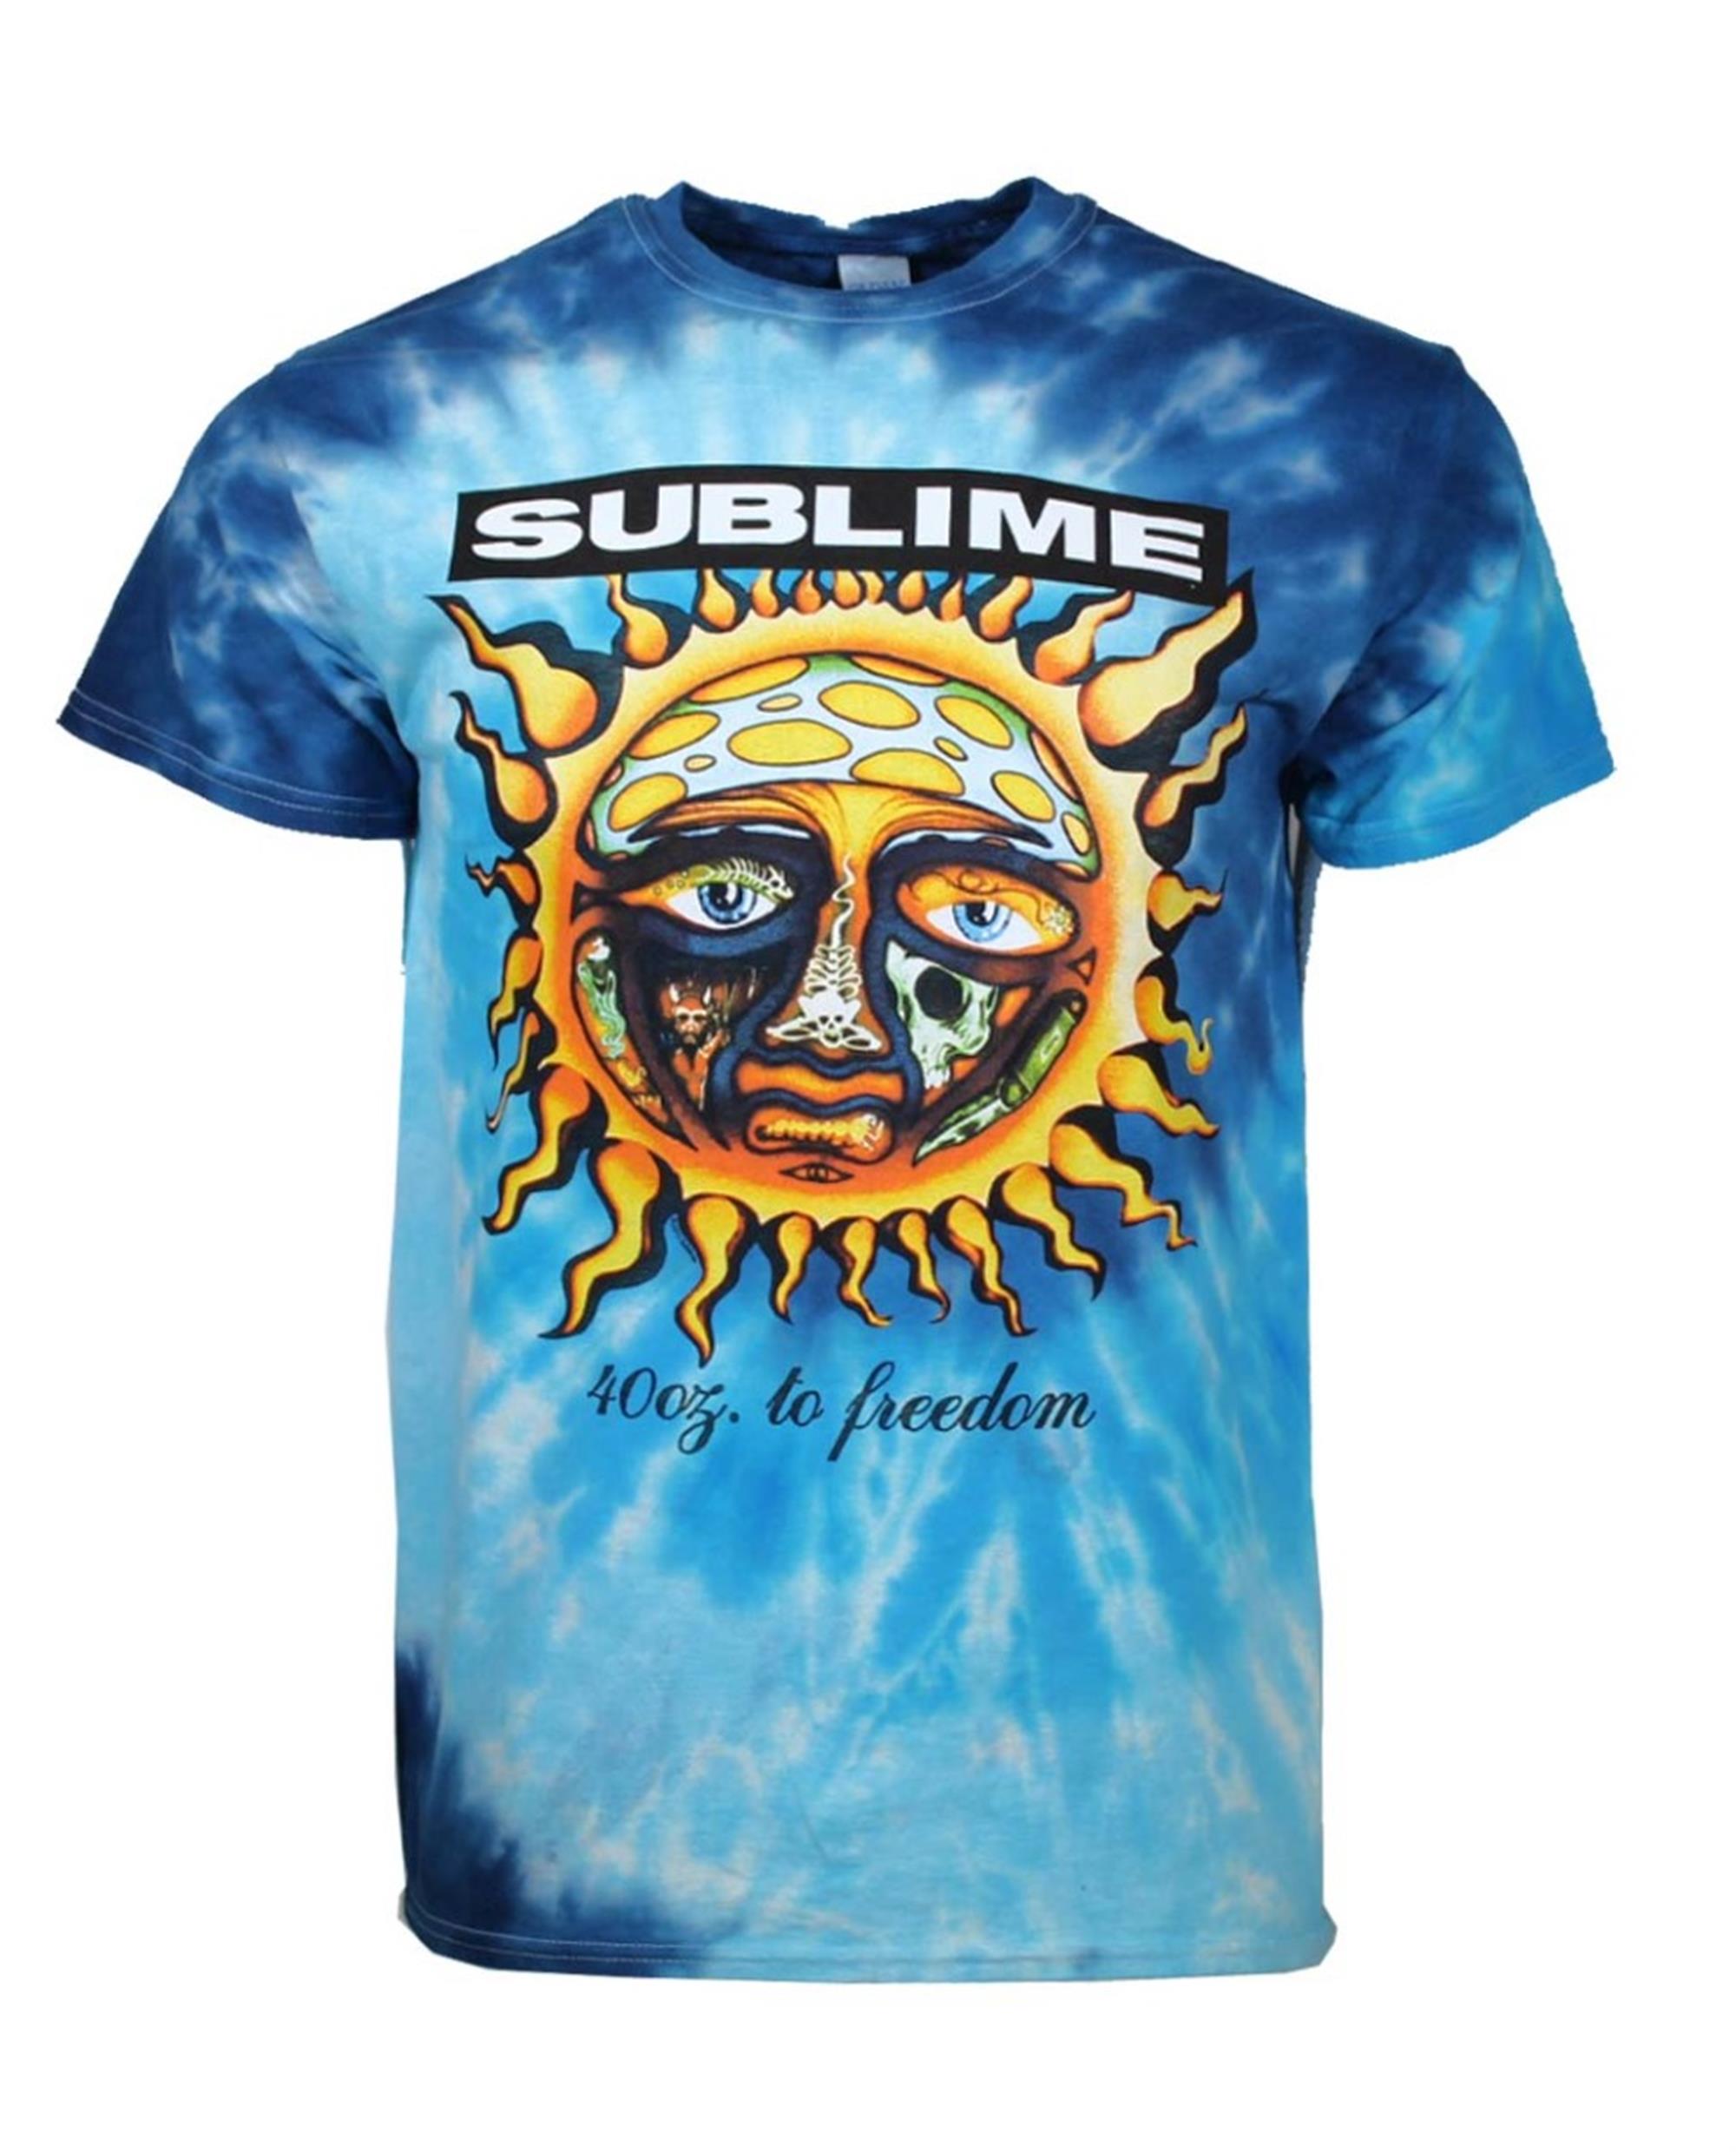 Sublime 40 Oz To Freedom Blue Tie Dye T-Shirt